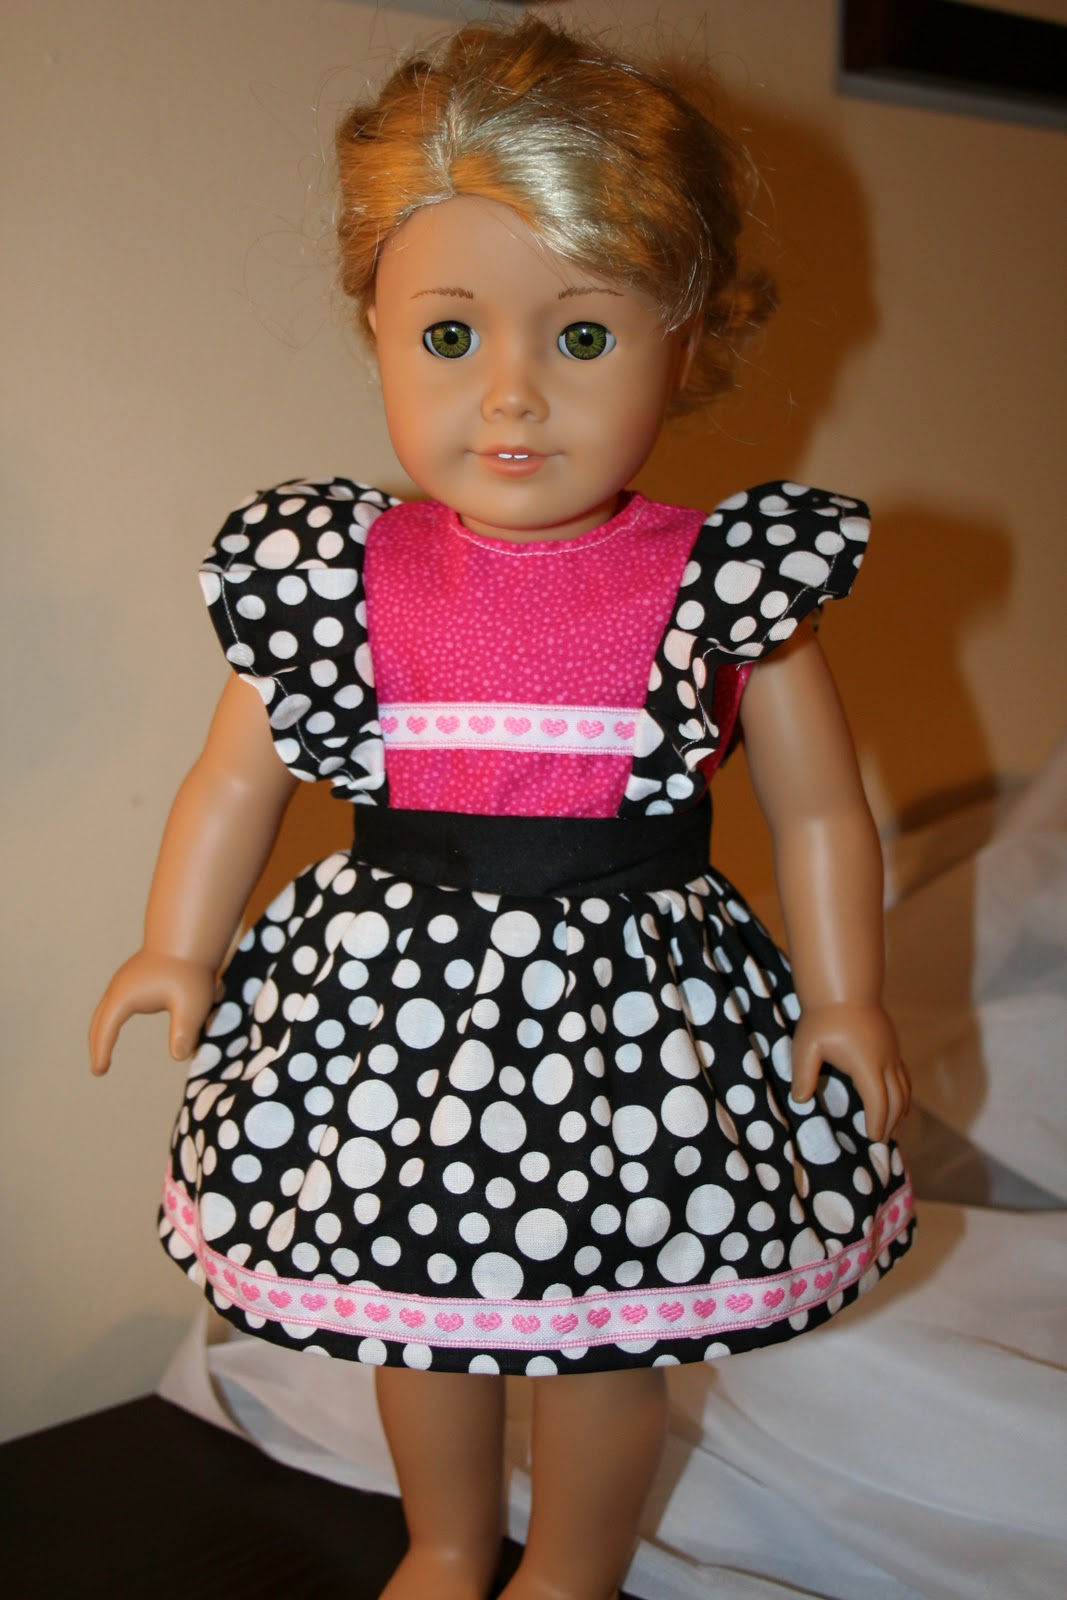 18 Doll Clothes Patterns - Compare Prices, Reviews and Buy at